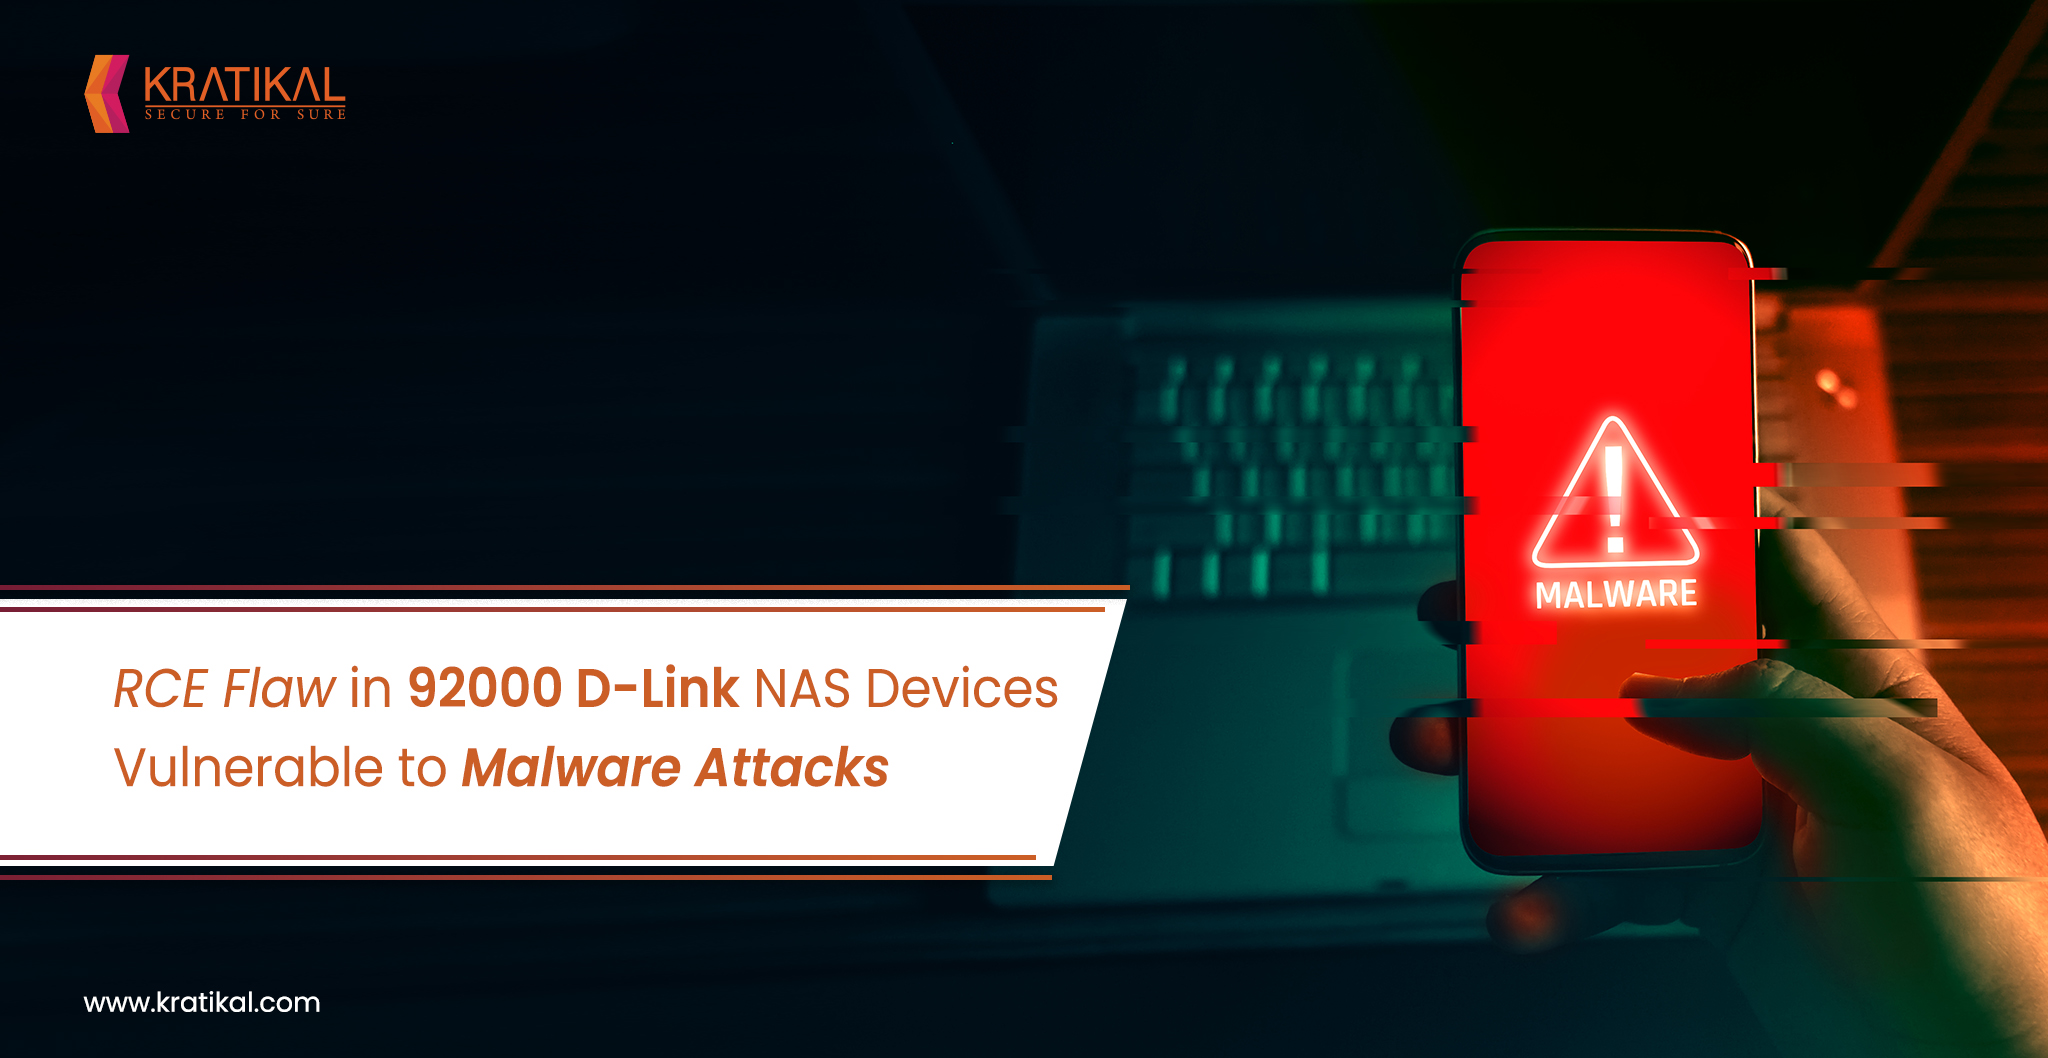 Critical Vulnerability in 92000 D-Link NAS Devices